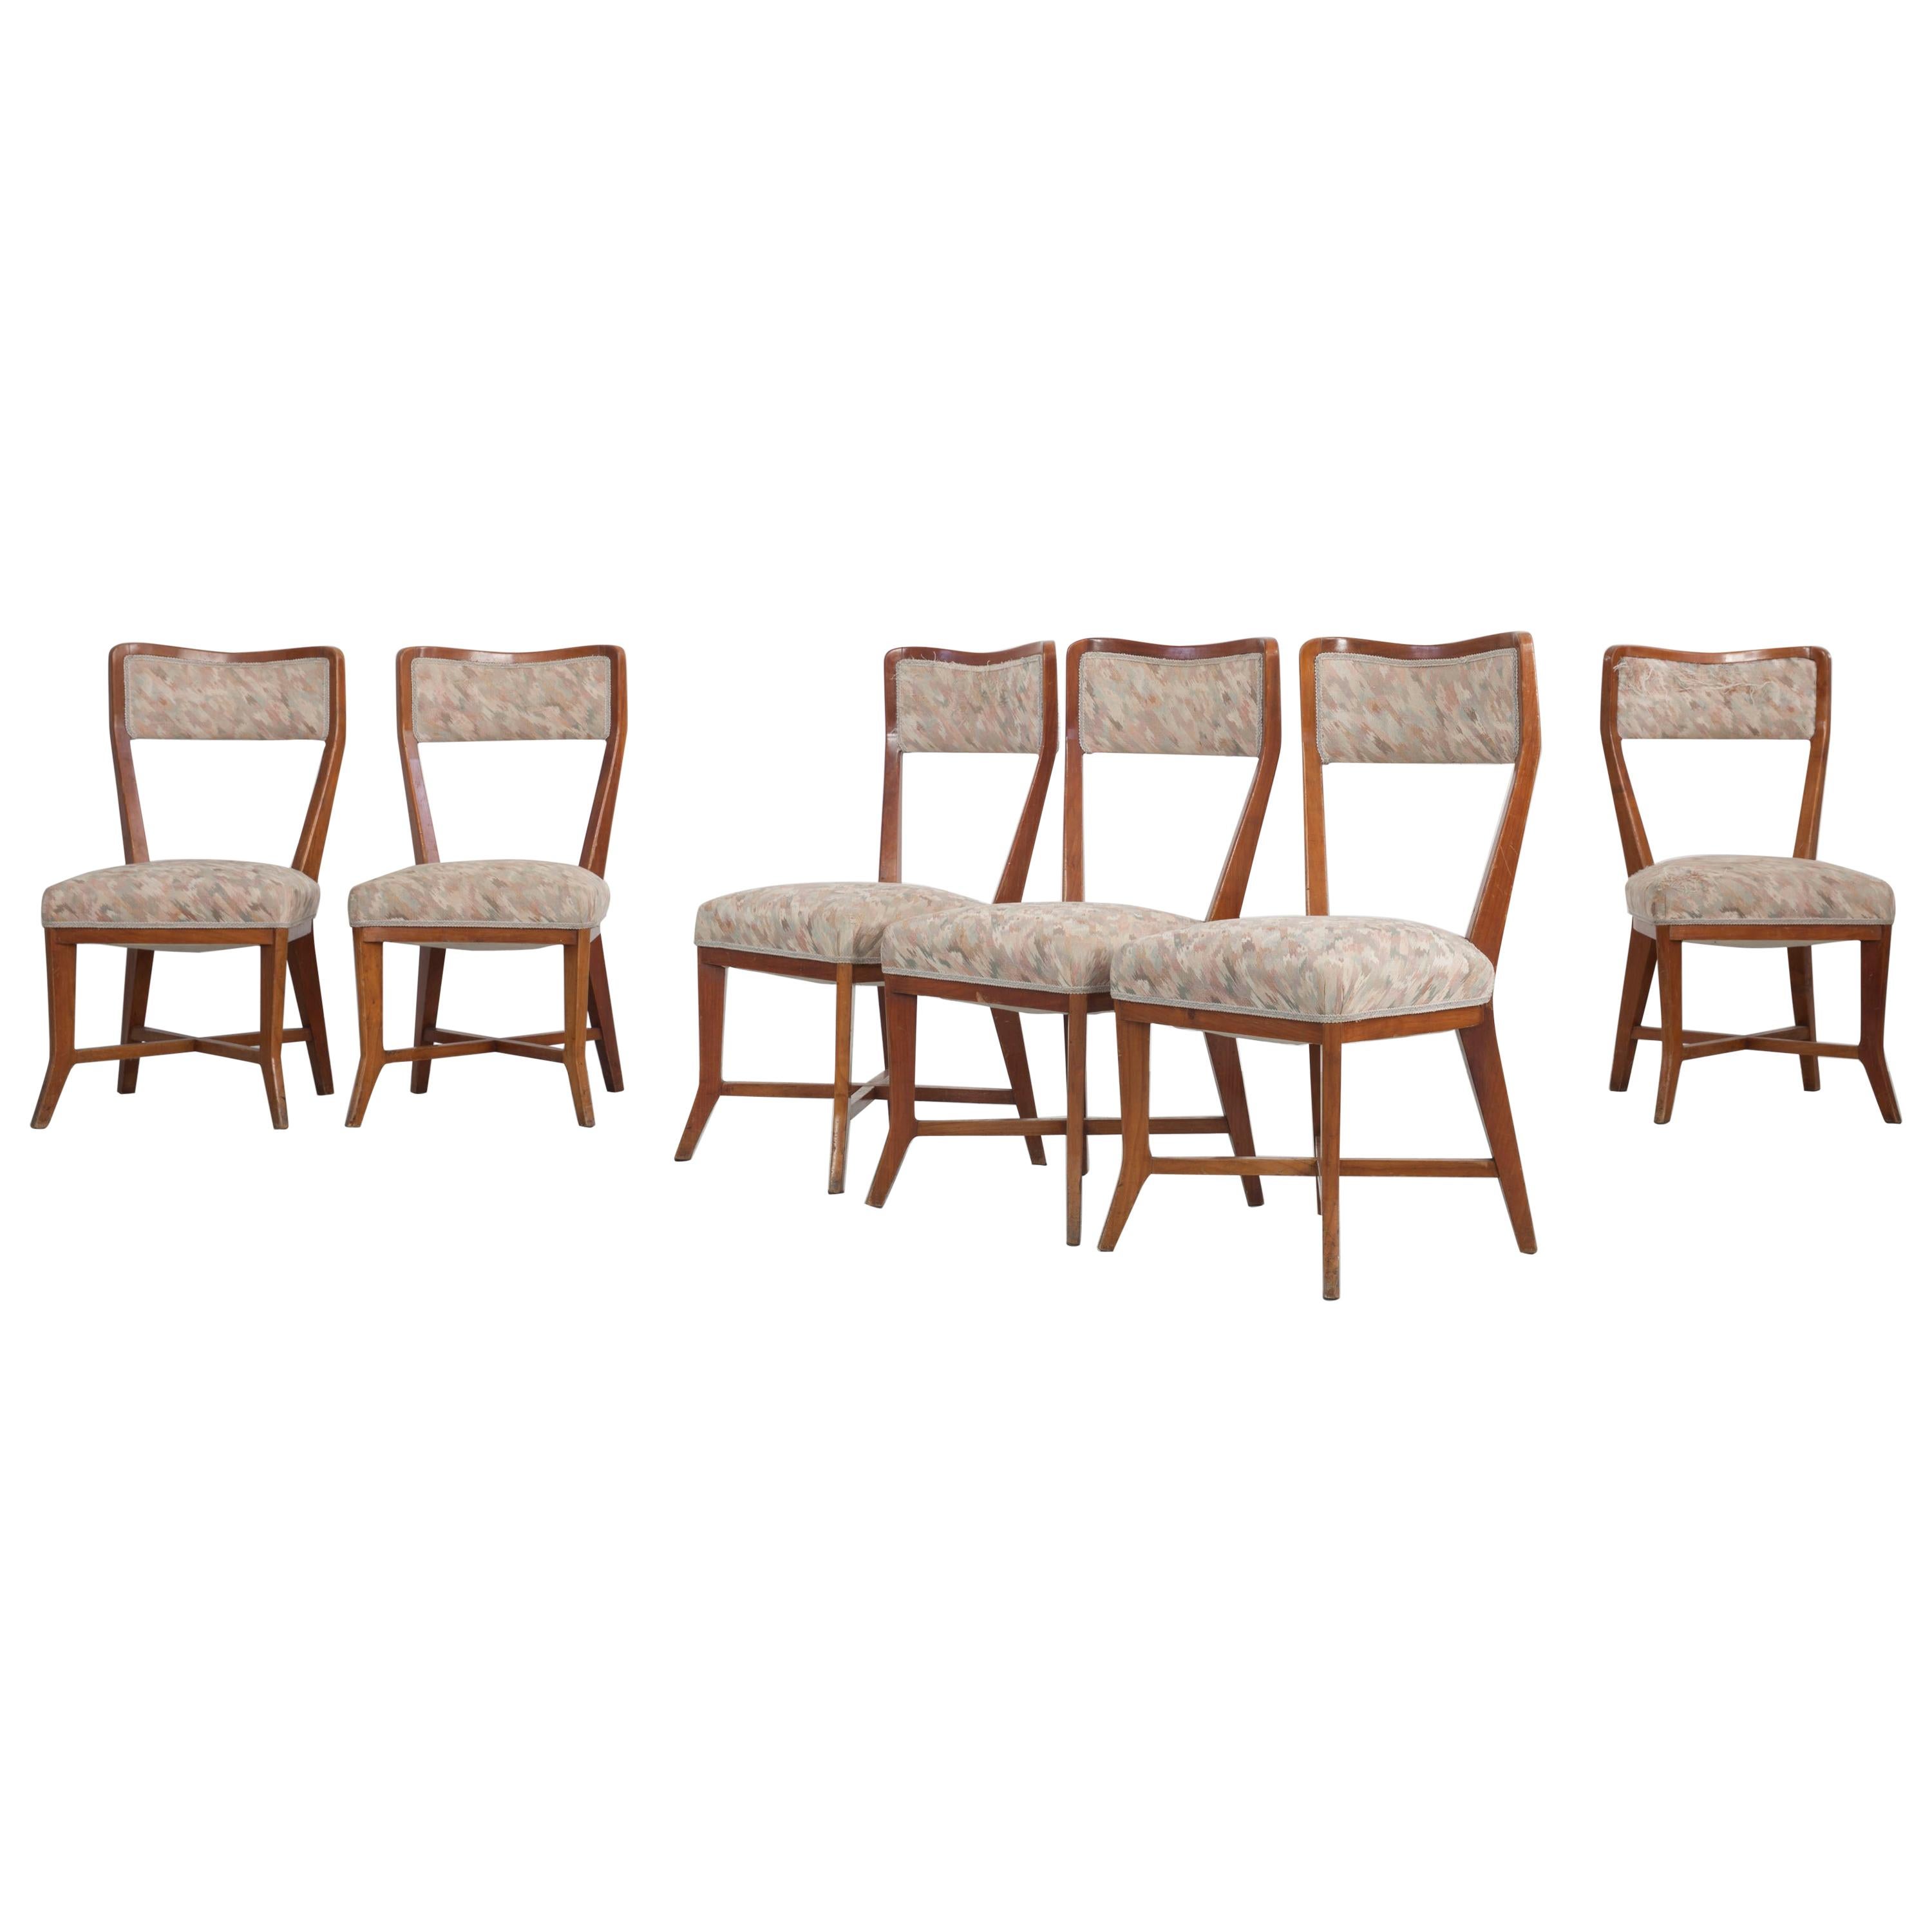 Set of 6 Melchiorre Bega Chairs Made of Cherrywood, Italy, 1950s